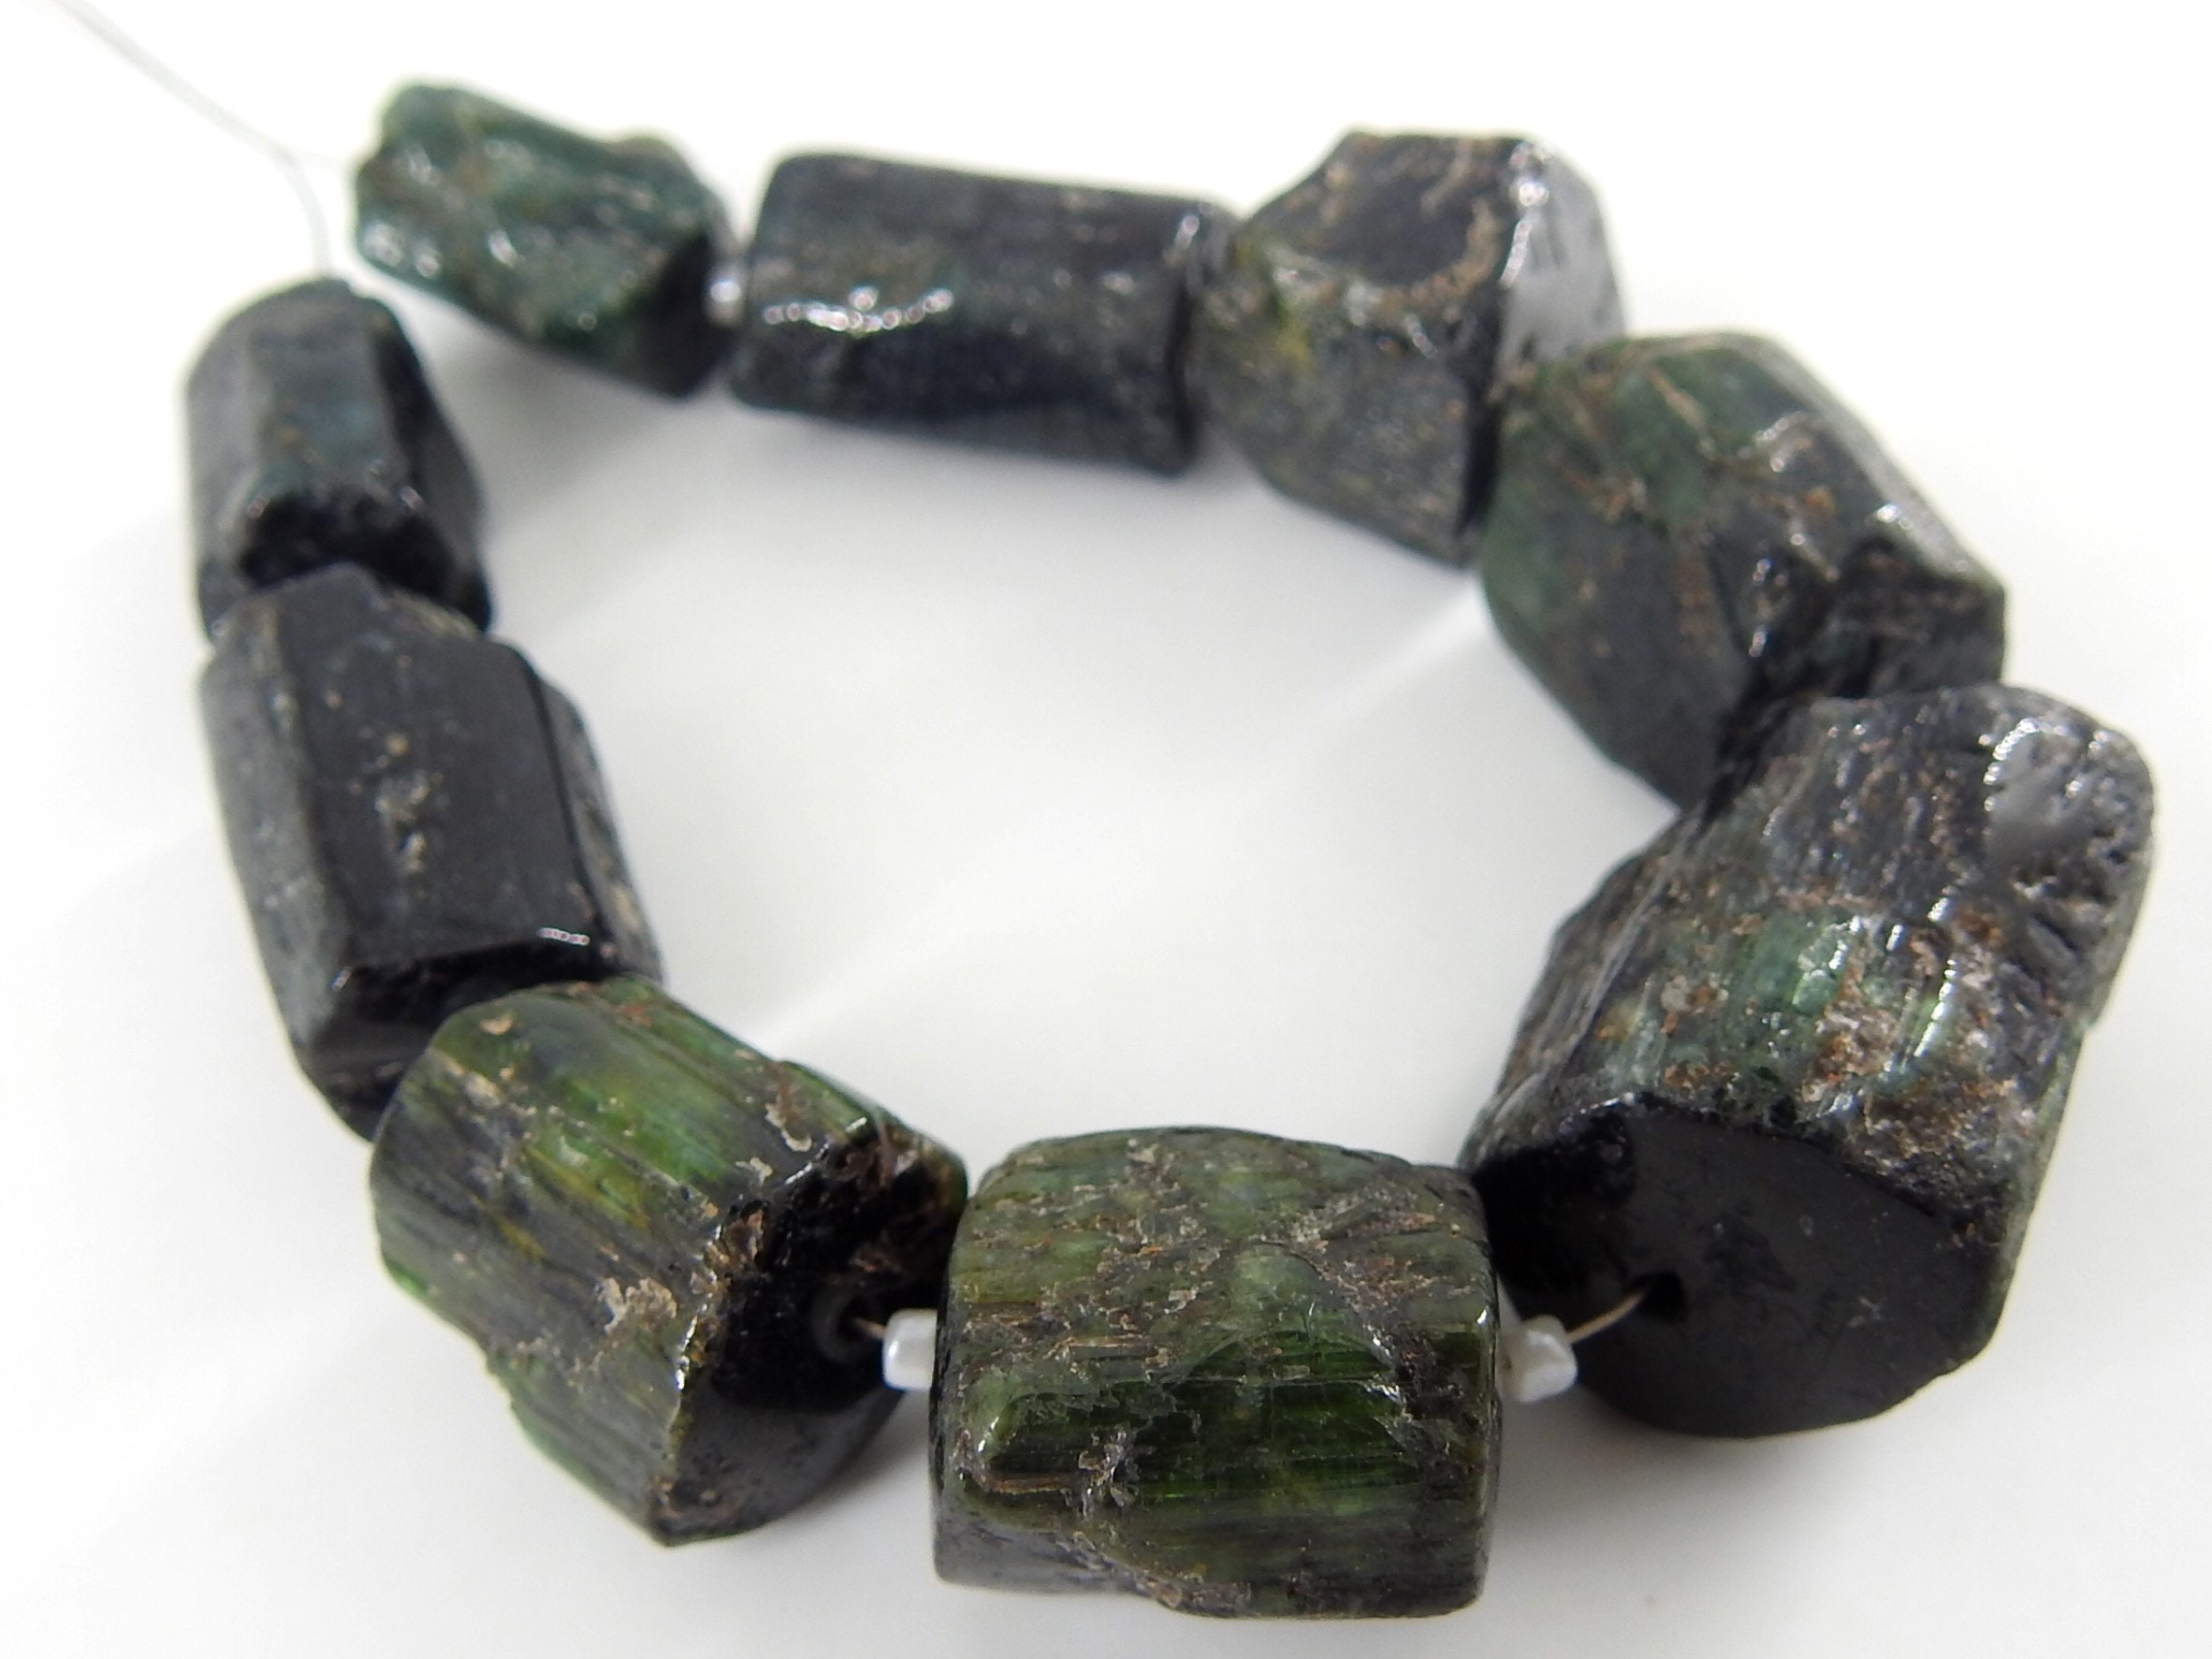 Green Tourmaline Natural Crystals Rough,Nuggets,Tumble,Tube,Loose Raw,Minerals Gemstone,Wholesaler,Supplies 9Piece 22X18To12X9MM Approx R2 | Save 33% - Rajasthan Living 15